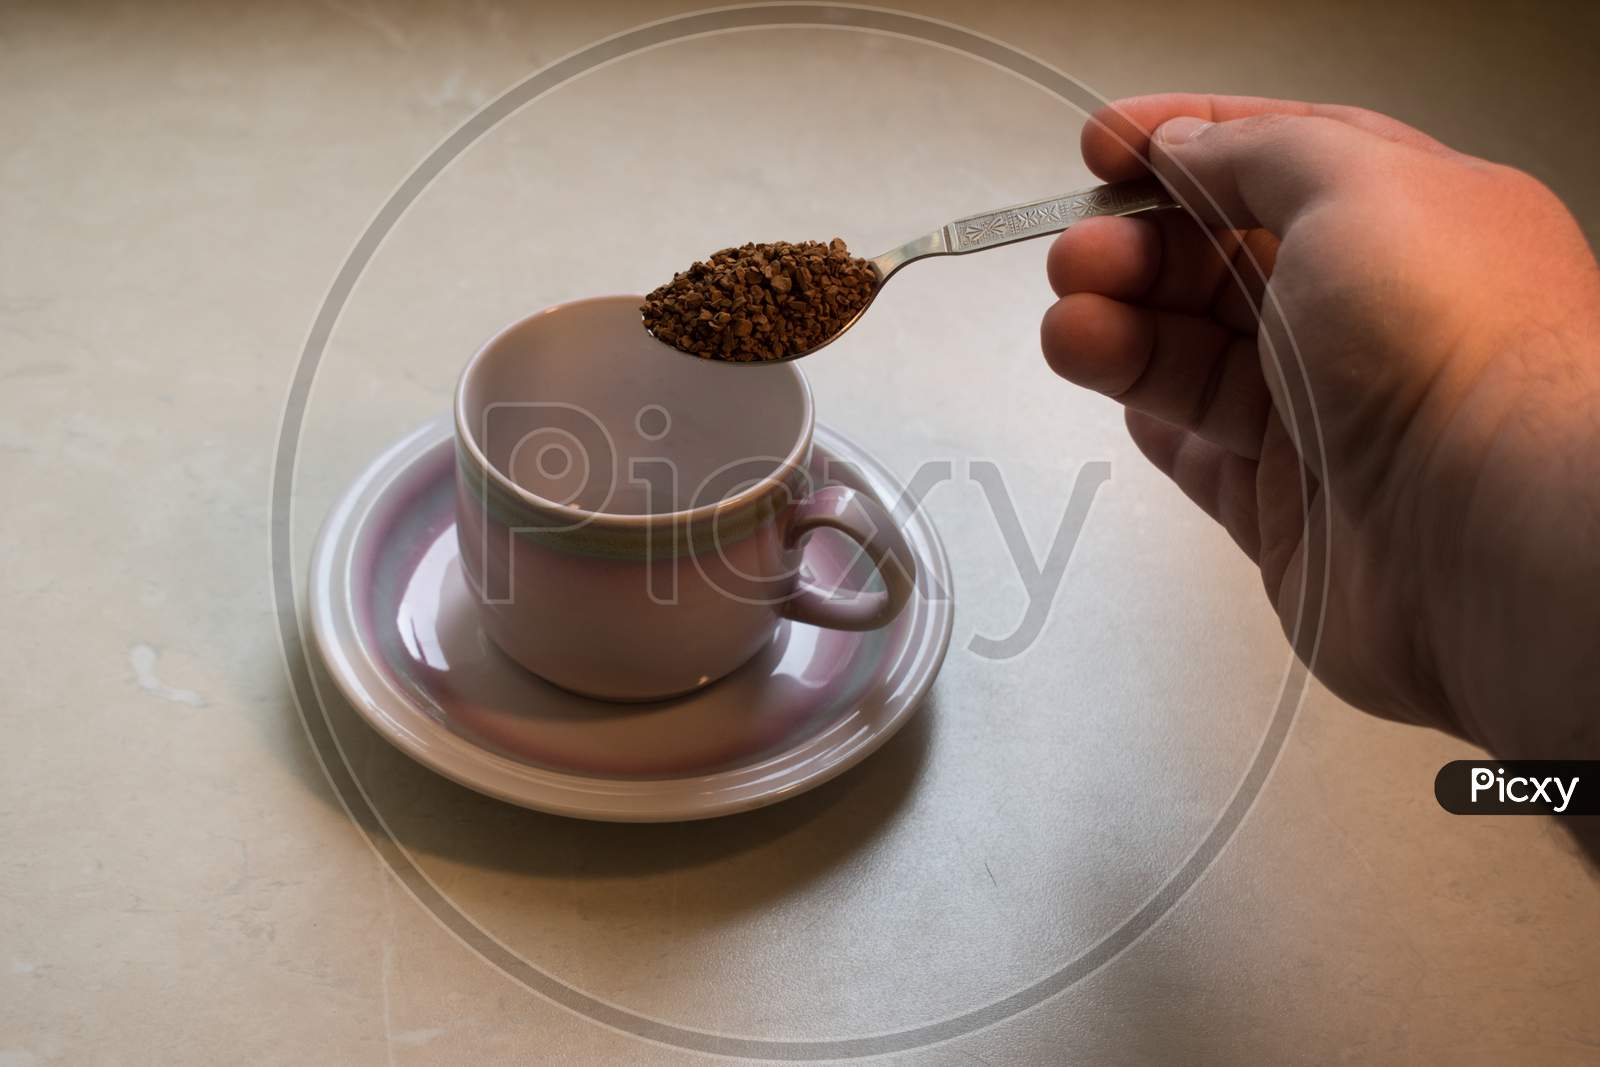 The Preparation Of Soluble Coffee. Freeze-Dried Coffee In A Spoon Over A Cup On Plate.